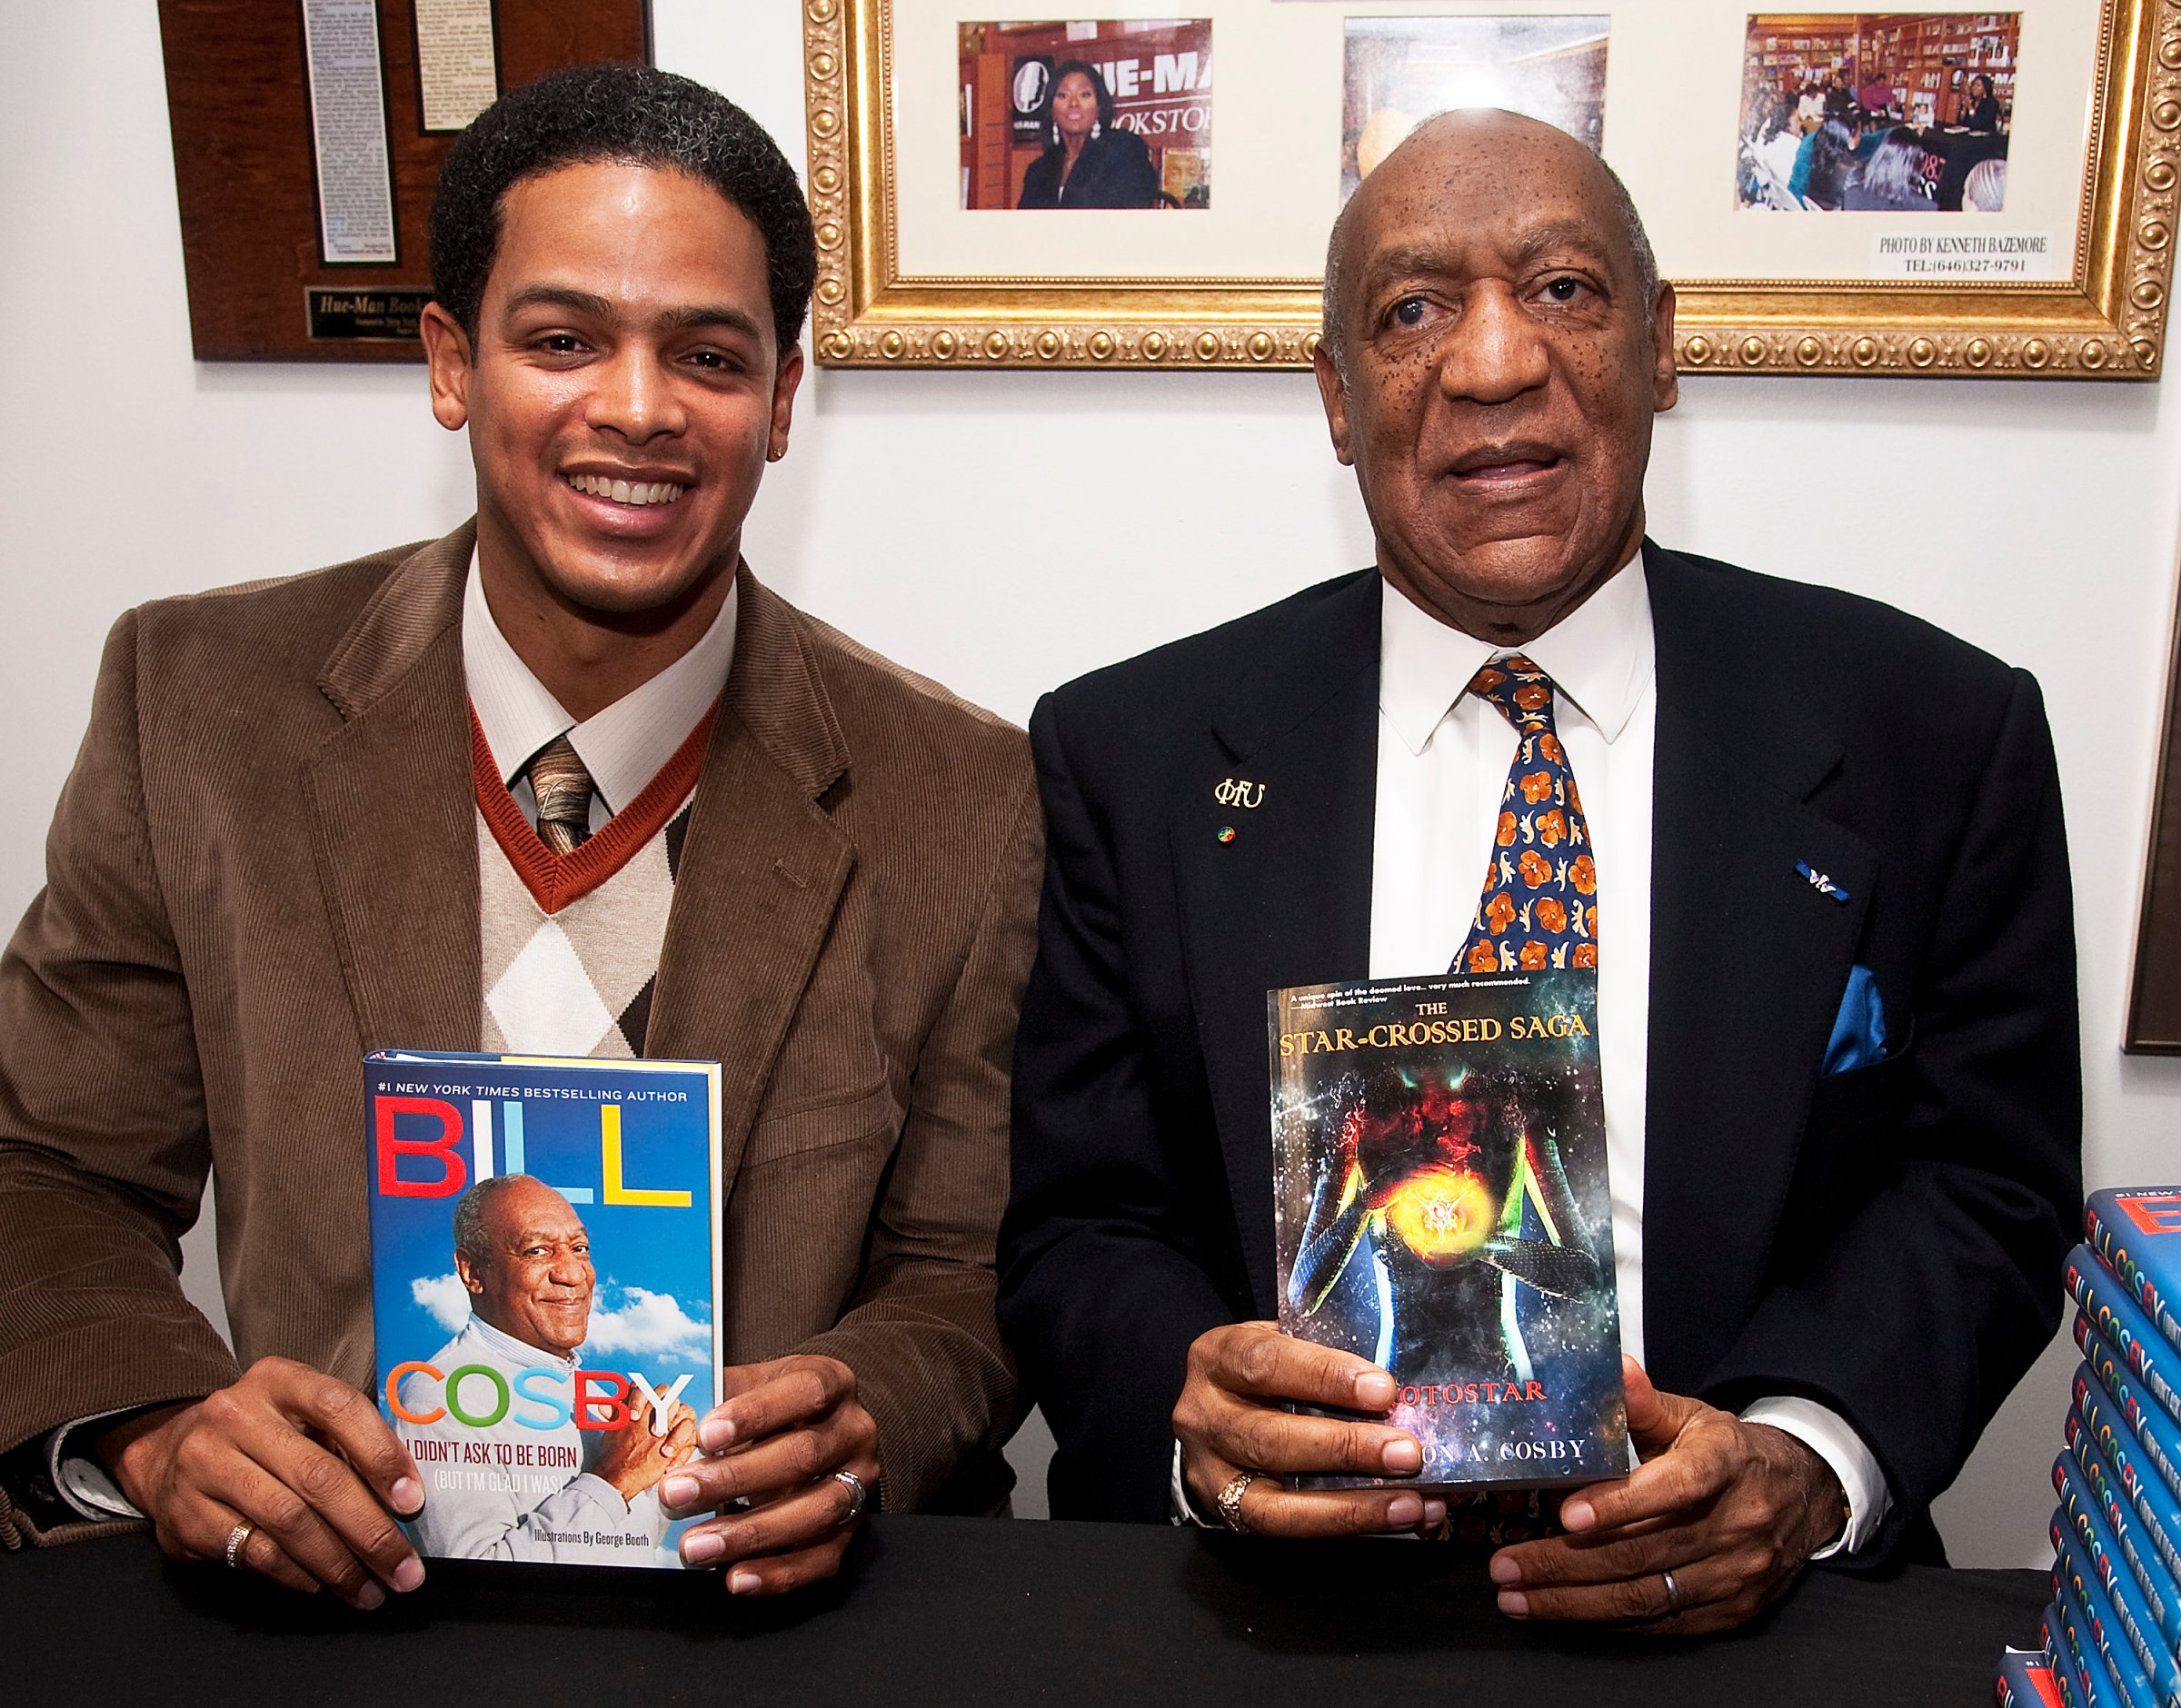 Braxton A. Cosby promotes his book "The Star-Crossed Saga Prostar" while his uncle Bill Cosby promotes "I Didn't Ask To Be Born: (But I'm Glad I Was)" at Hue-Man Bookstore & Cafe on Jan. 18, 2012 in New York,.